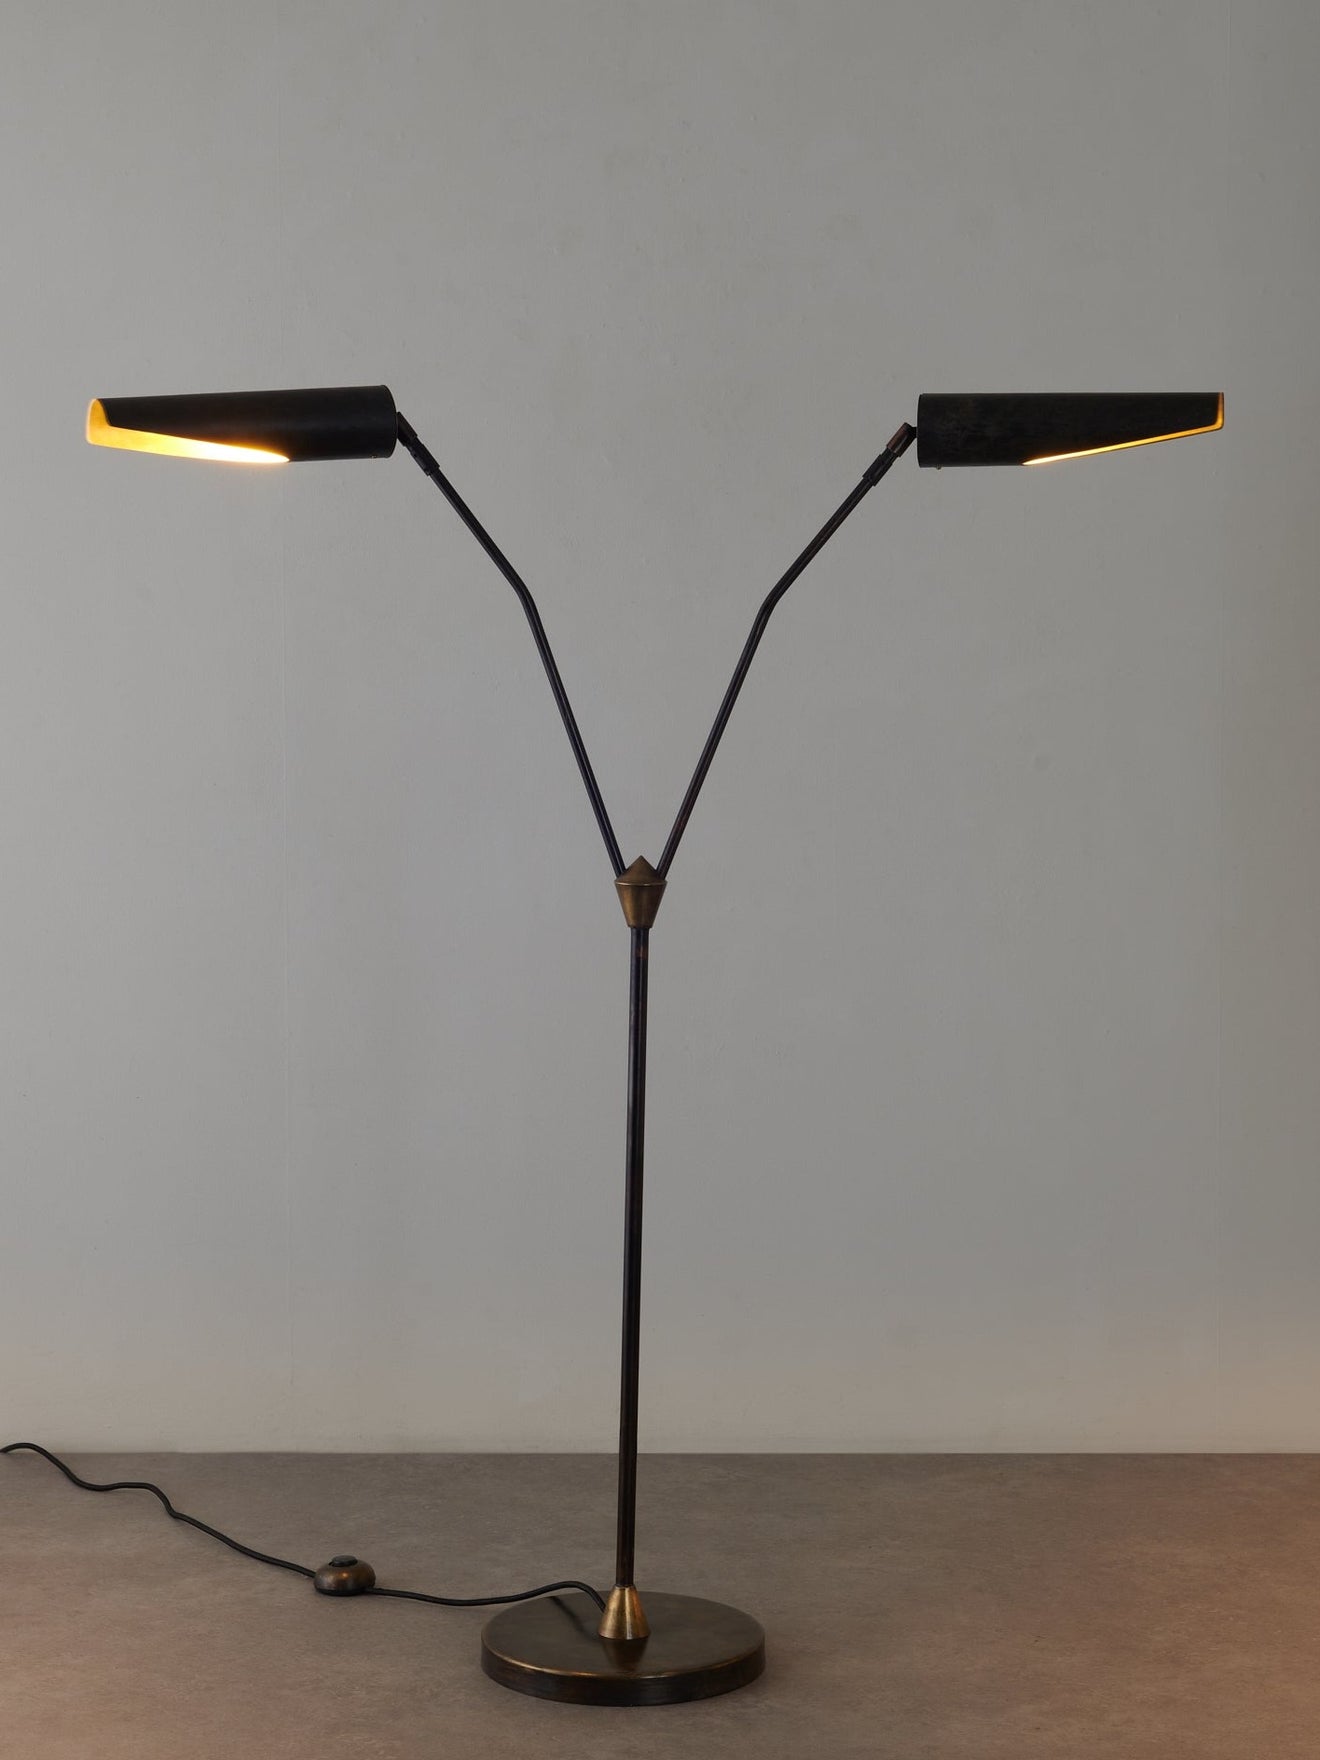 TROIG II FLOOR LAMP BY THIERRY JEANNOT